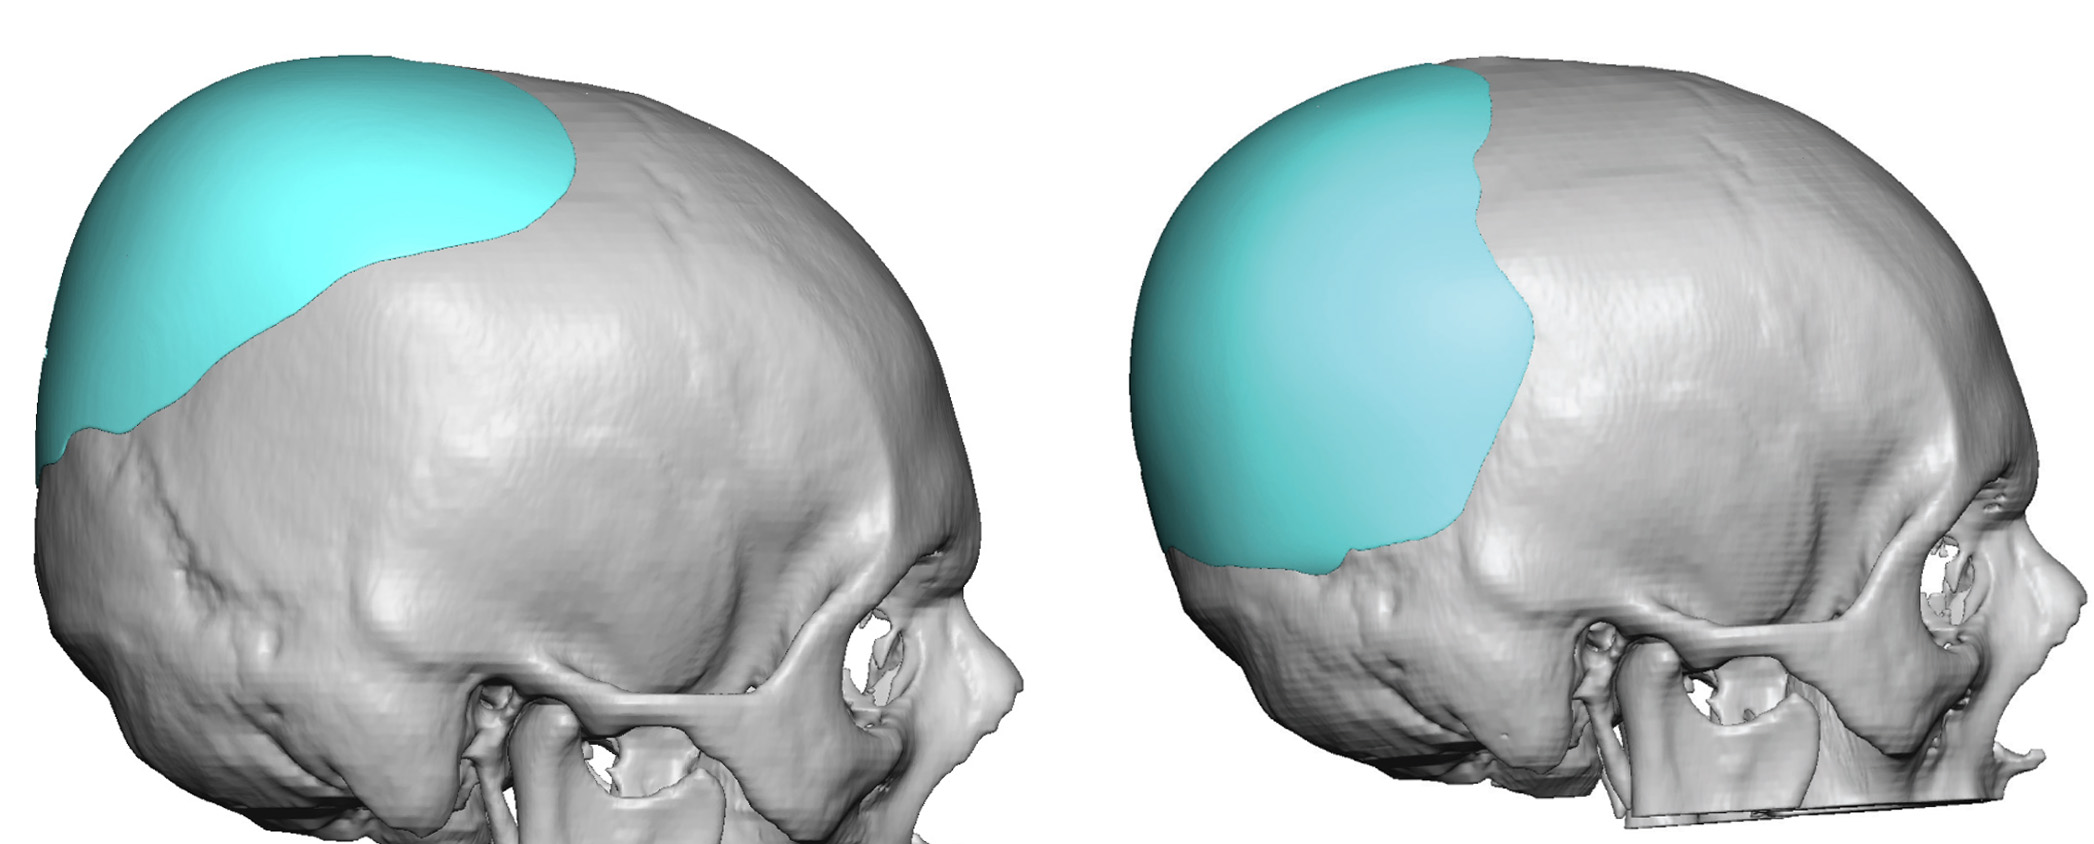 Plastic Surgery Case Study Custom Skull Implant Replacement For